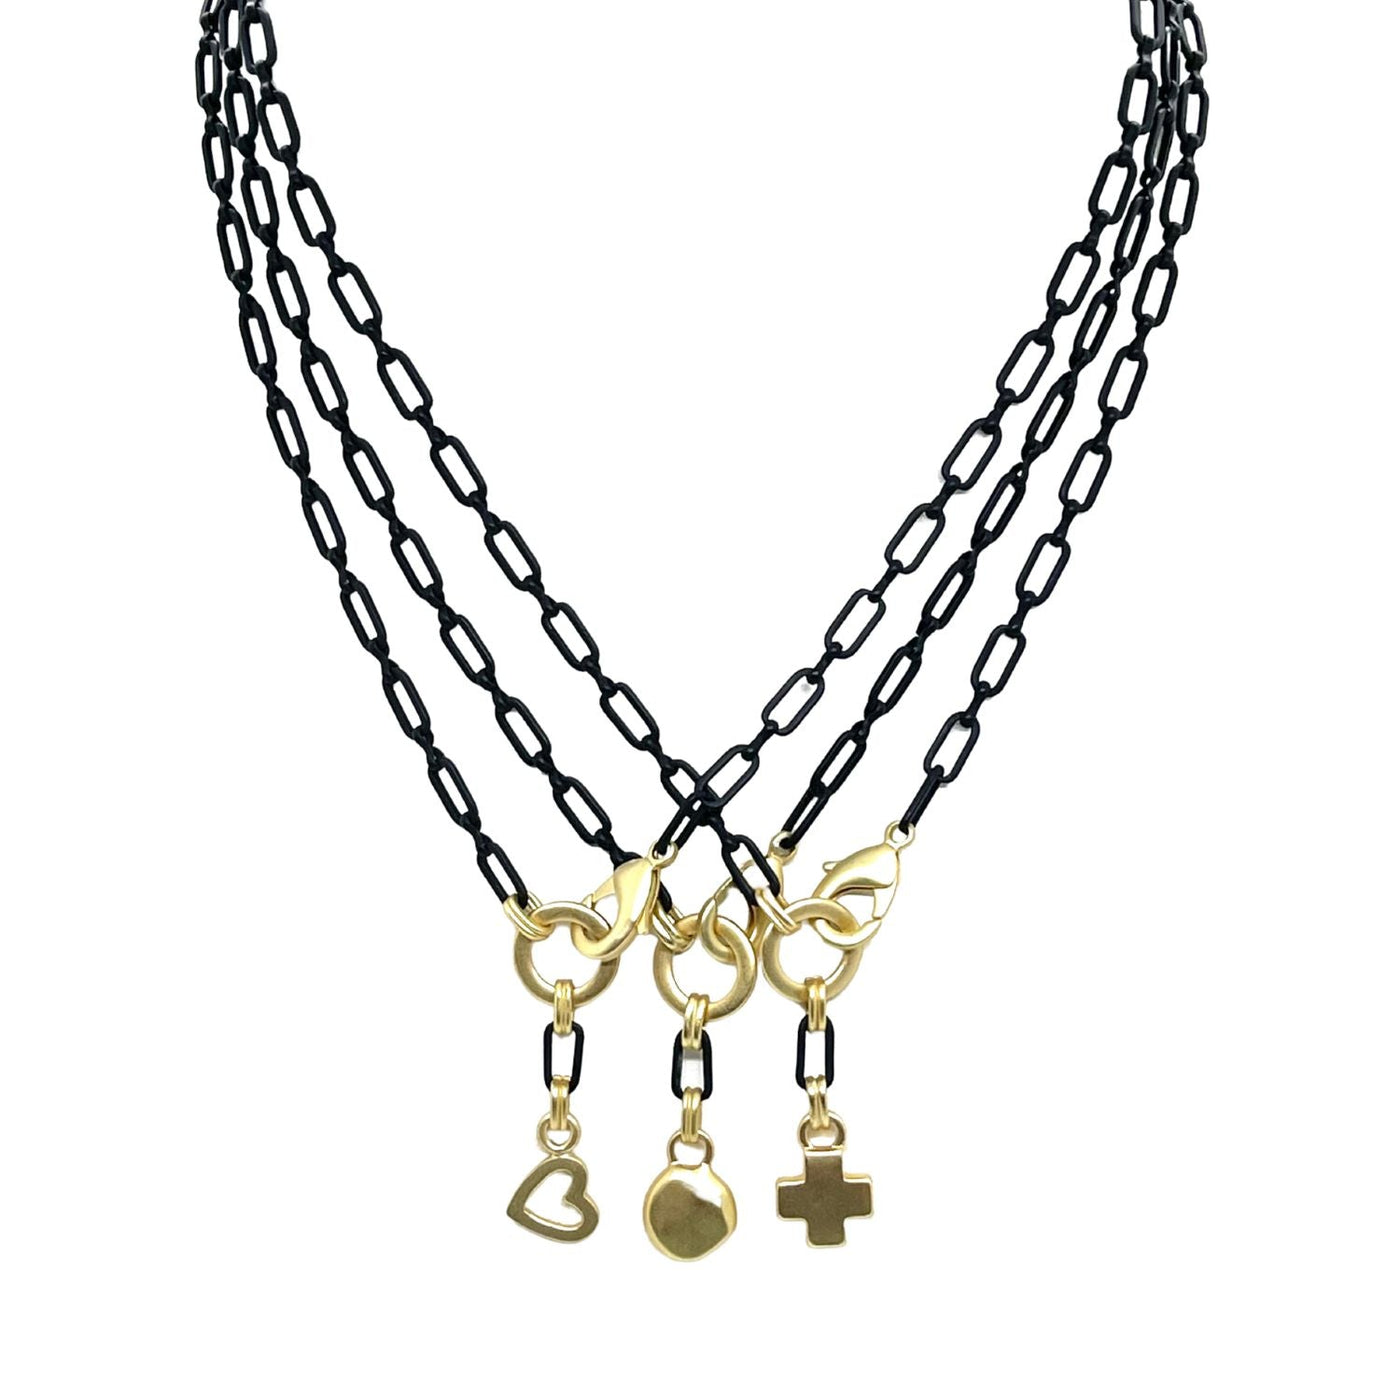 Matte Black Paperclip Chain Necklace With Gold Cross Pendant